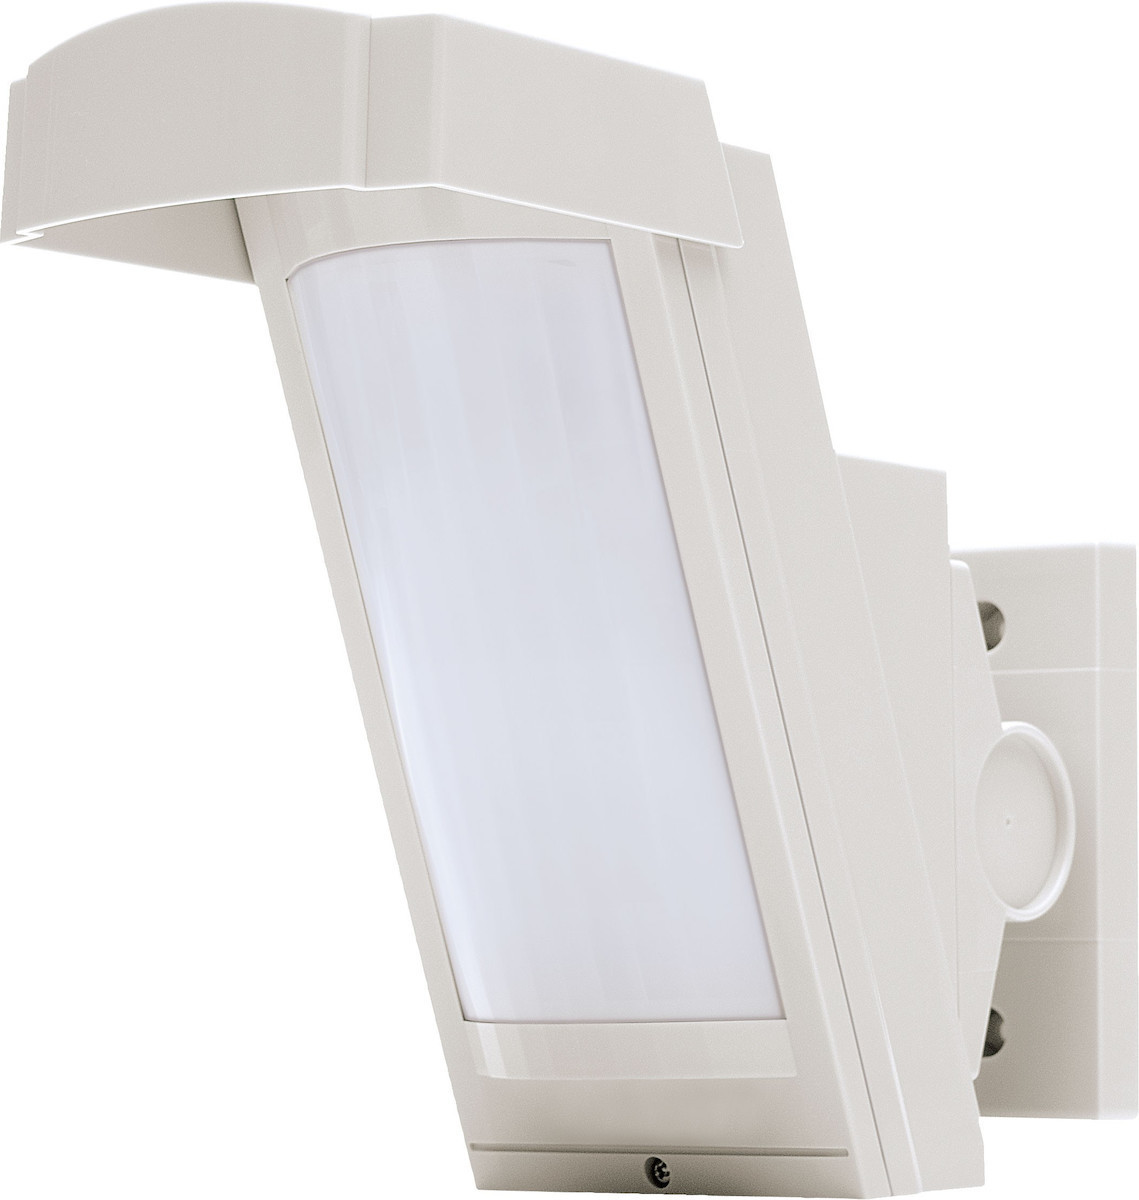 OPTEX HX-40 Outdoor Wired Dual PIR Infrared Motion Detector